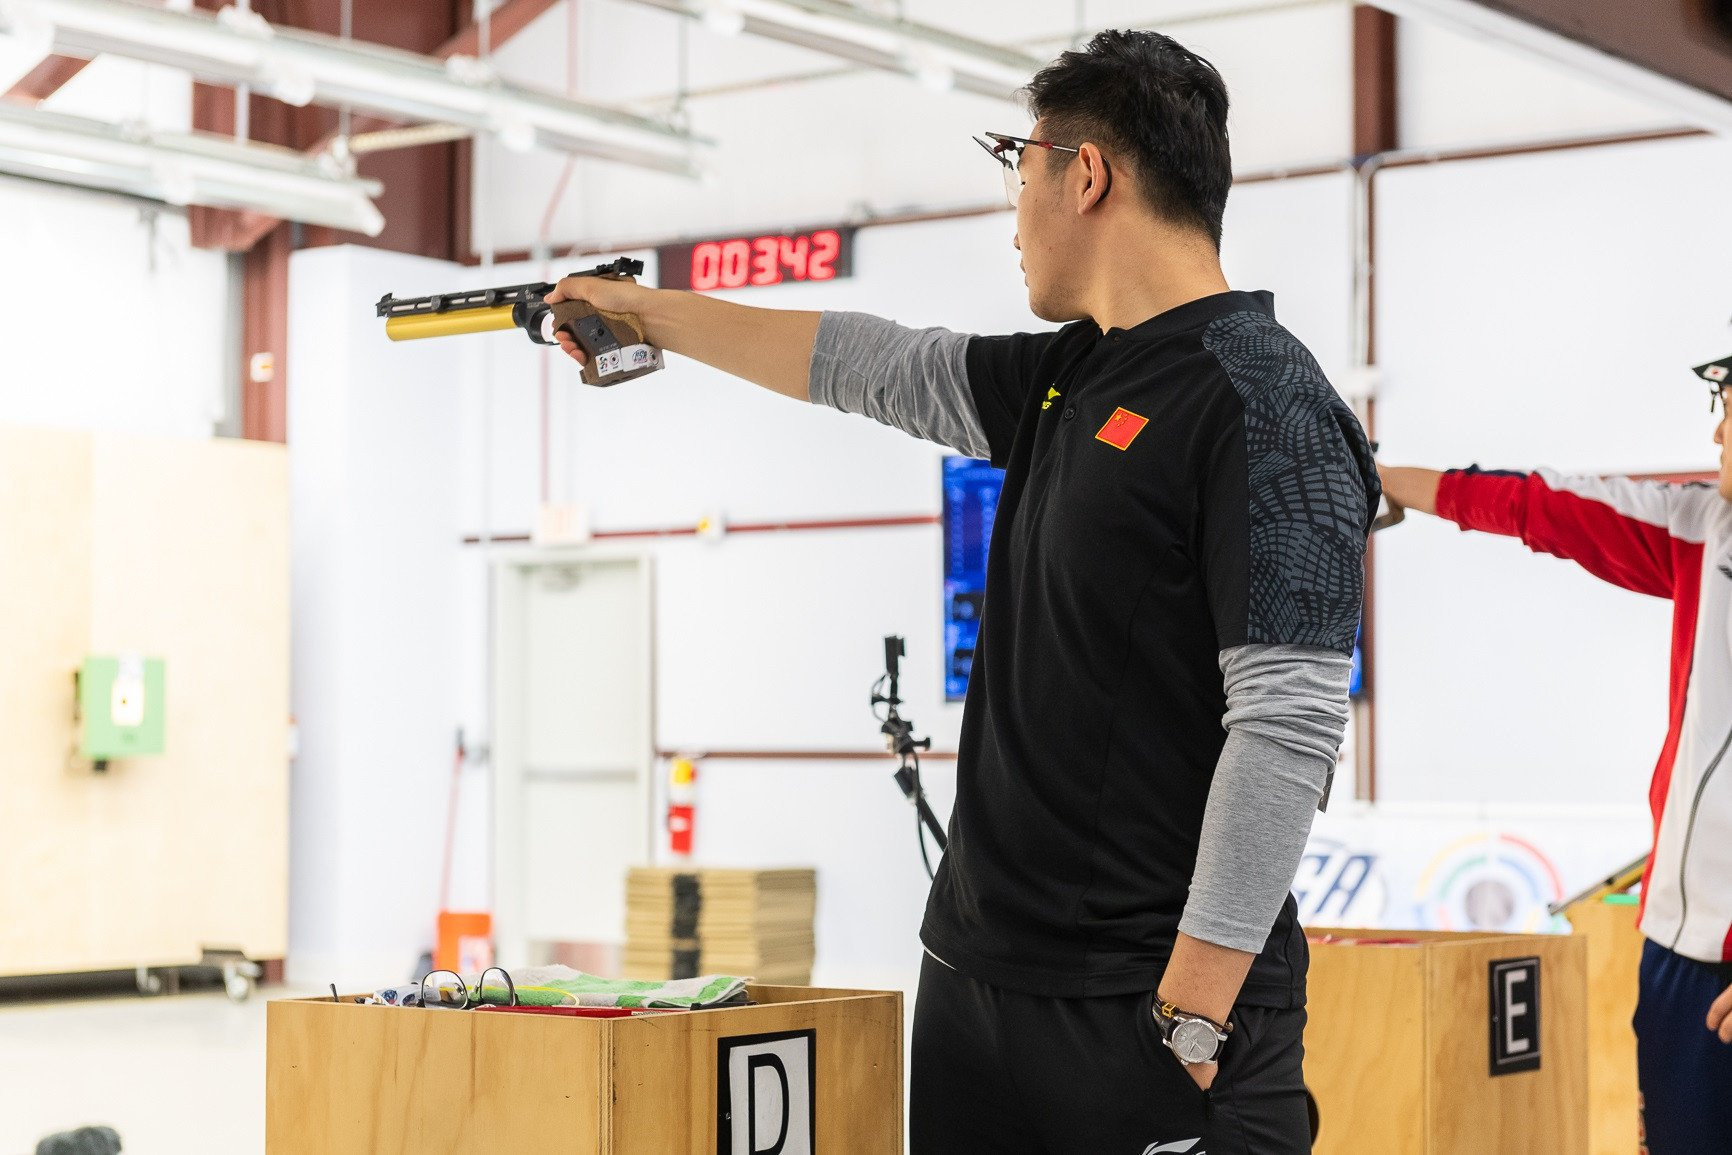 Wu Jiayu emerged as the winner of the men's event at the Asian Airgun Championships and Asian Shotgun Championships in Kuwait City ©ISSF